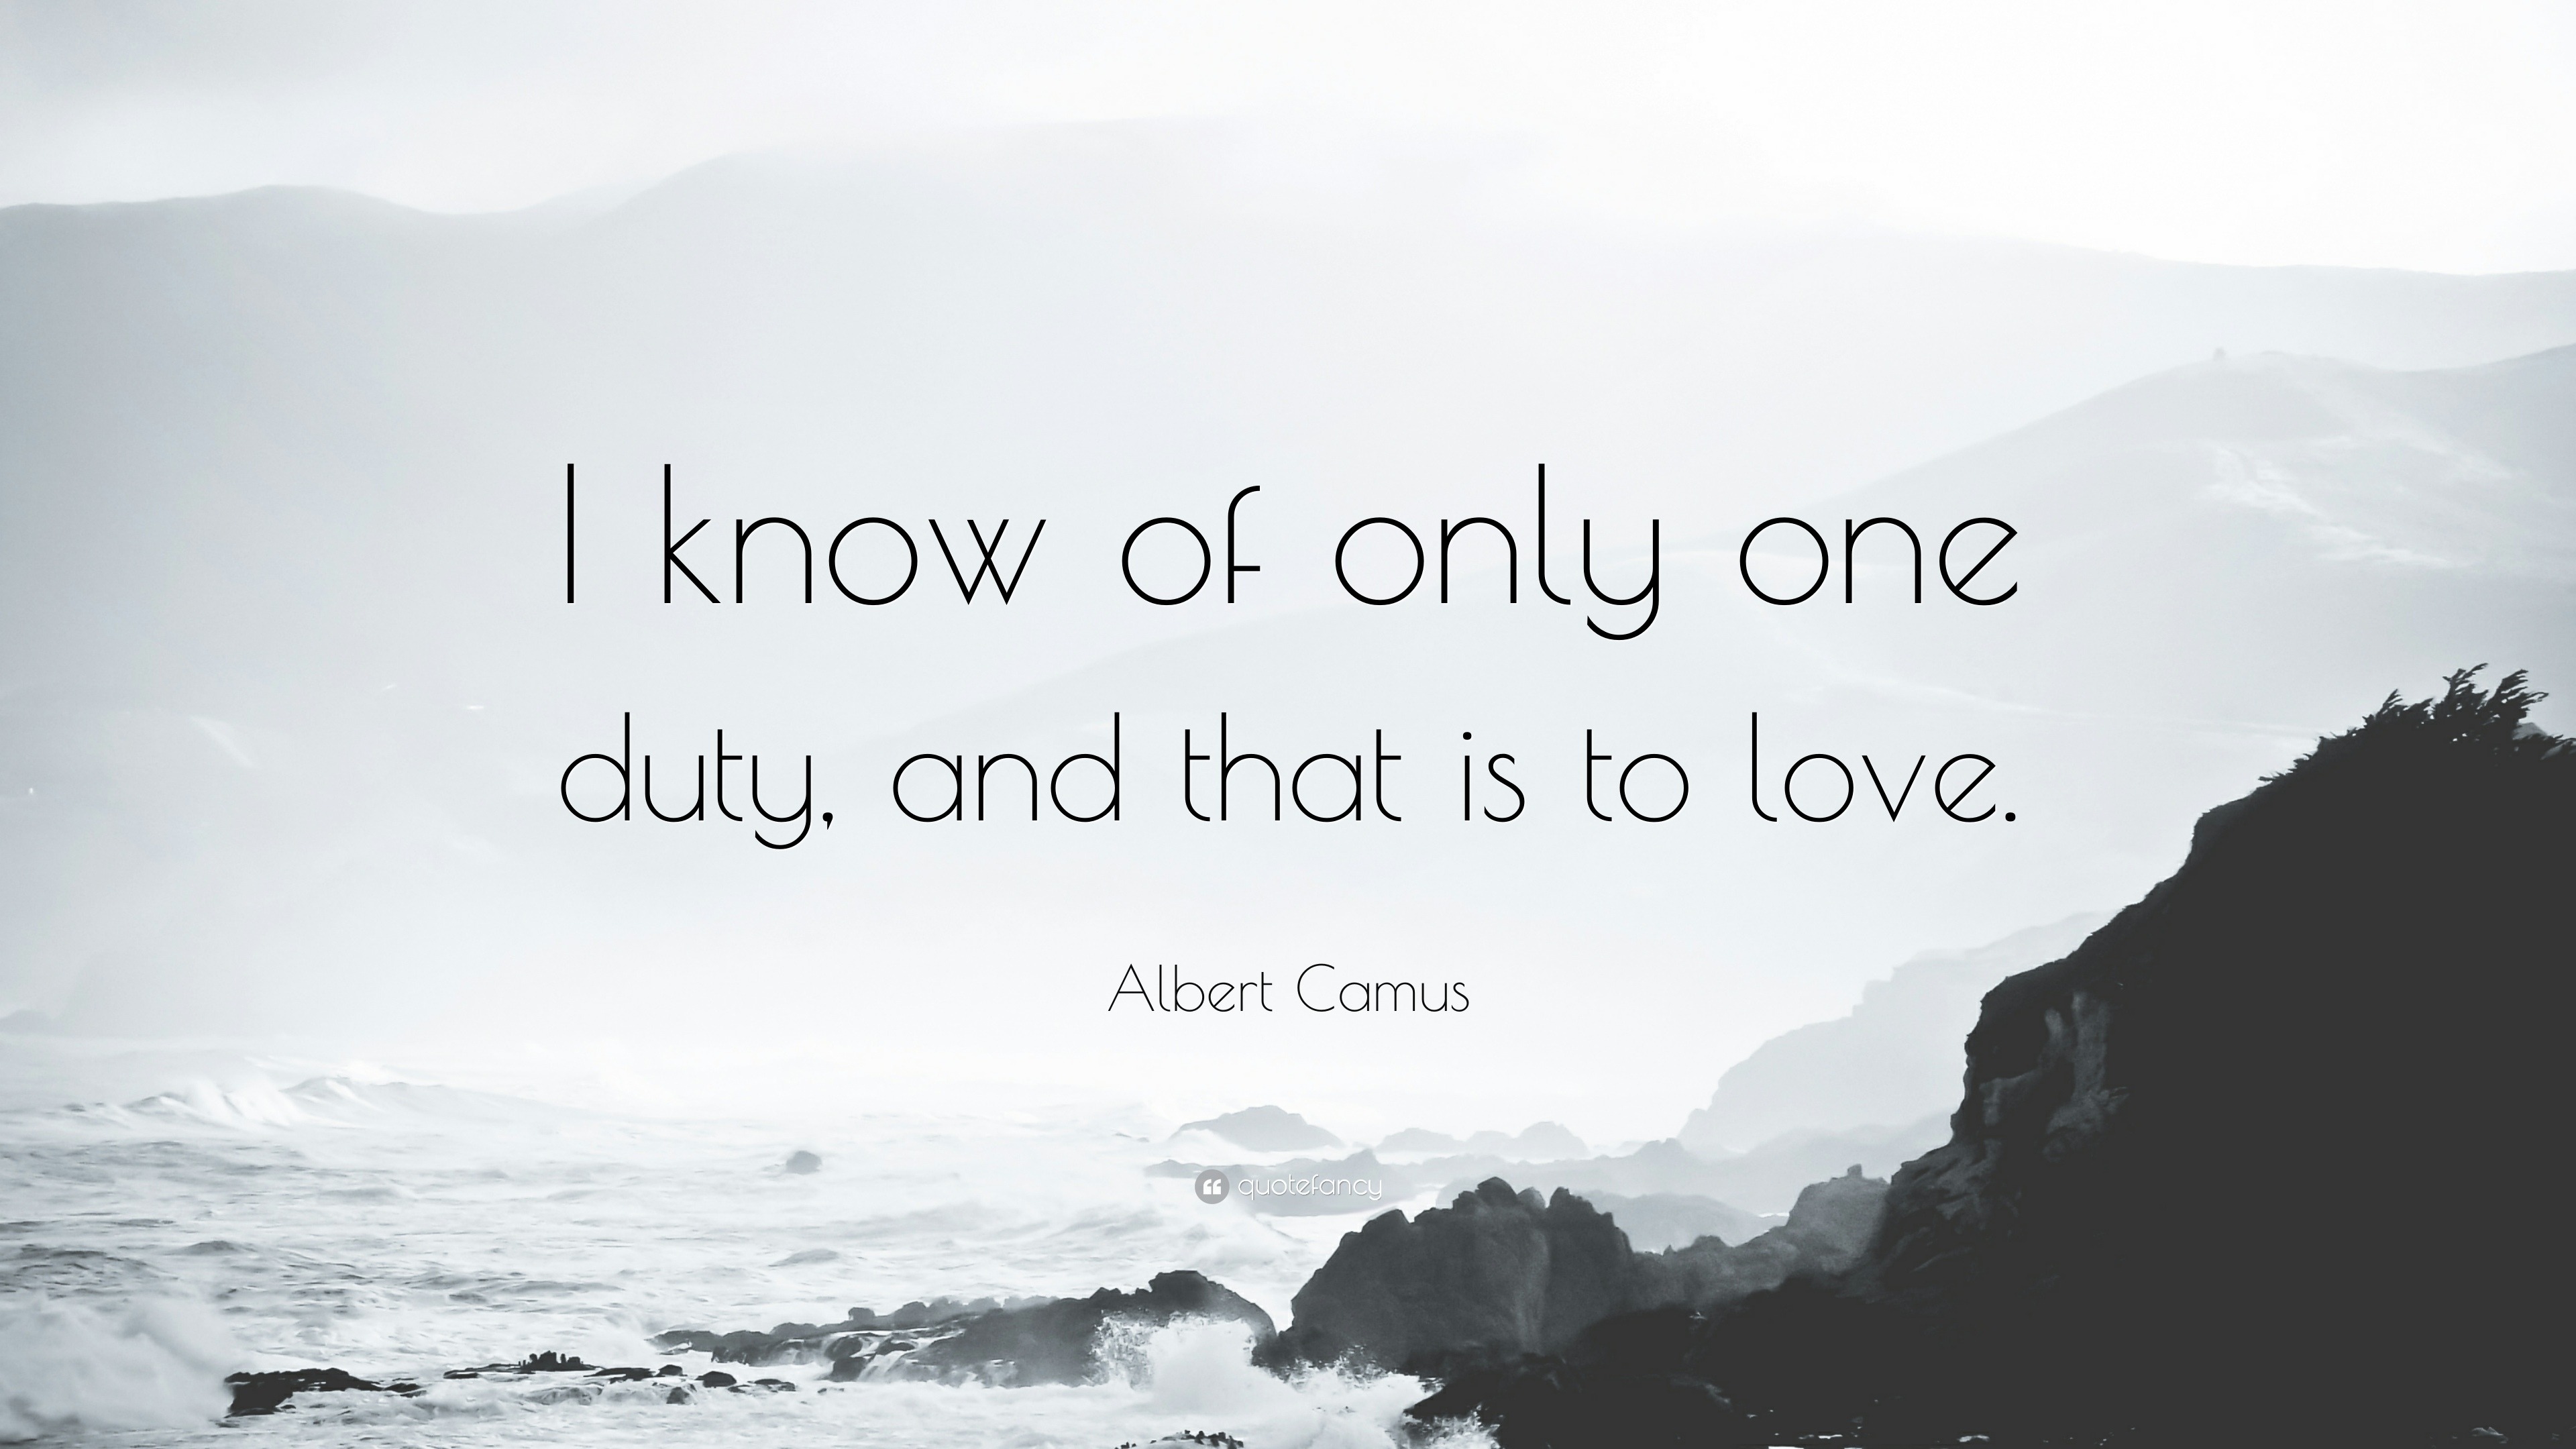 Albert Camus Quote “I know of only one duty and that is to